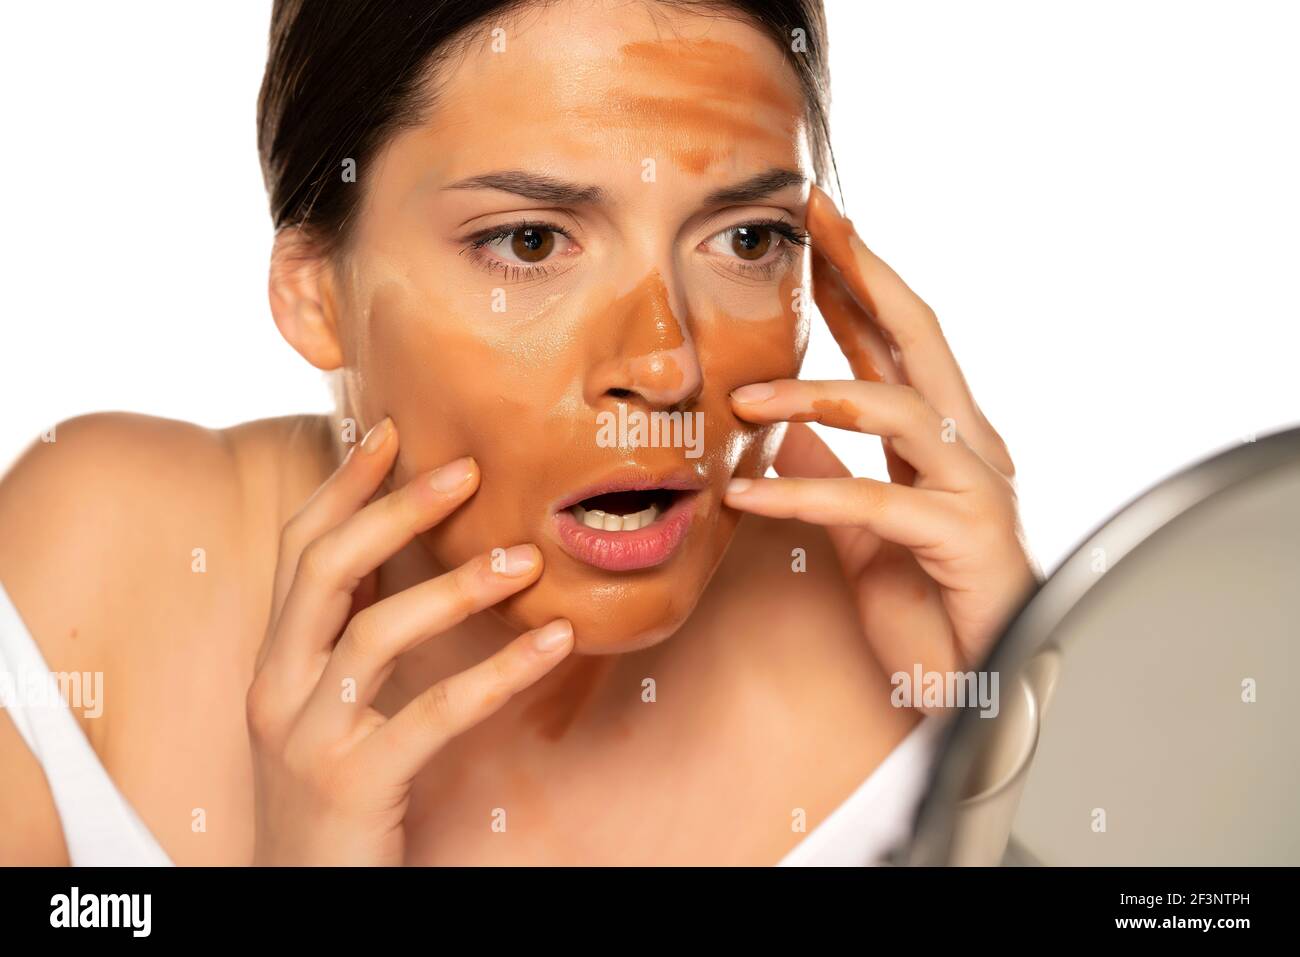 xJYoung shocked woman with wrong makeup base on her face on white background Stock Photo